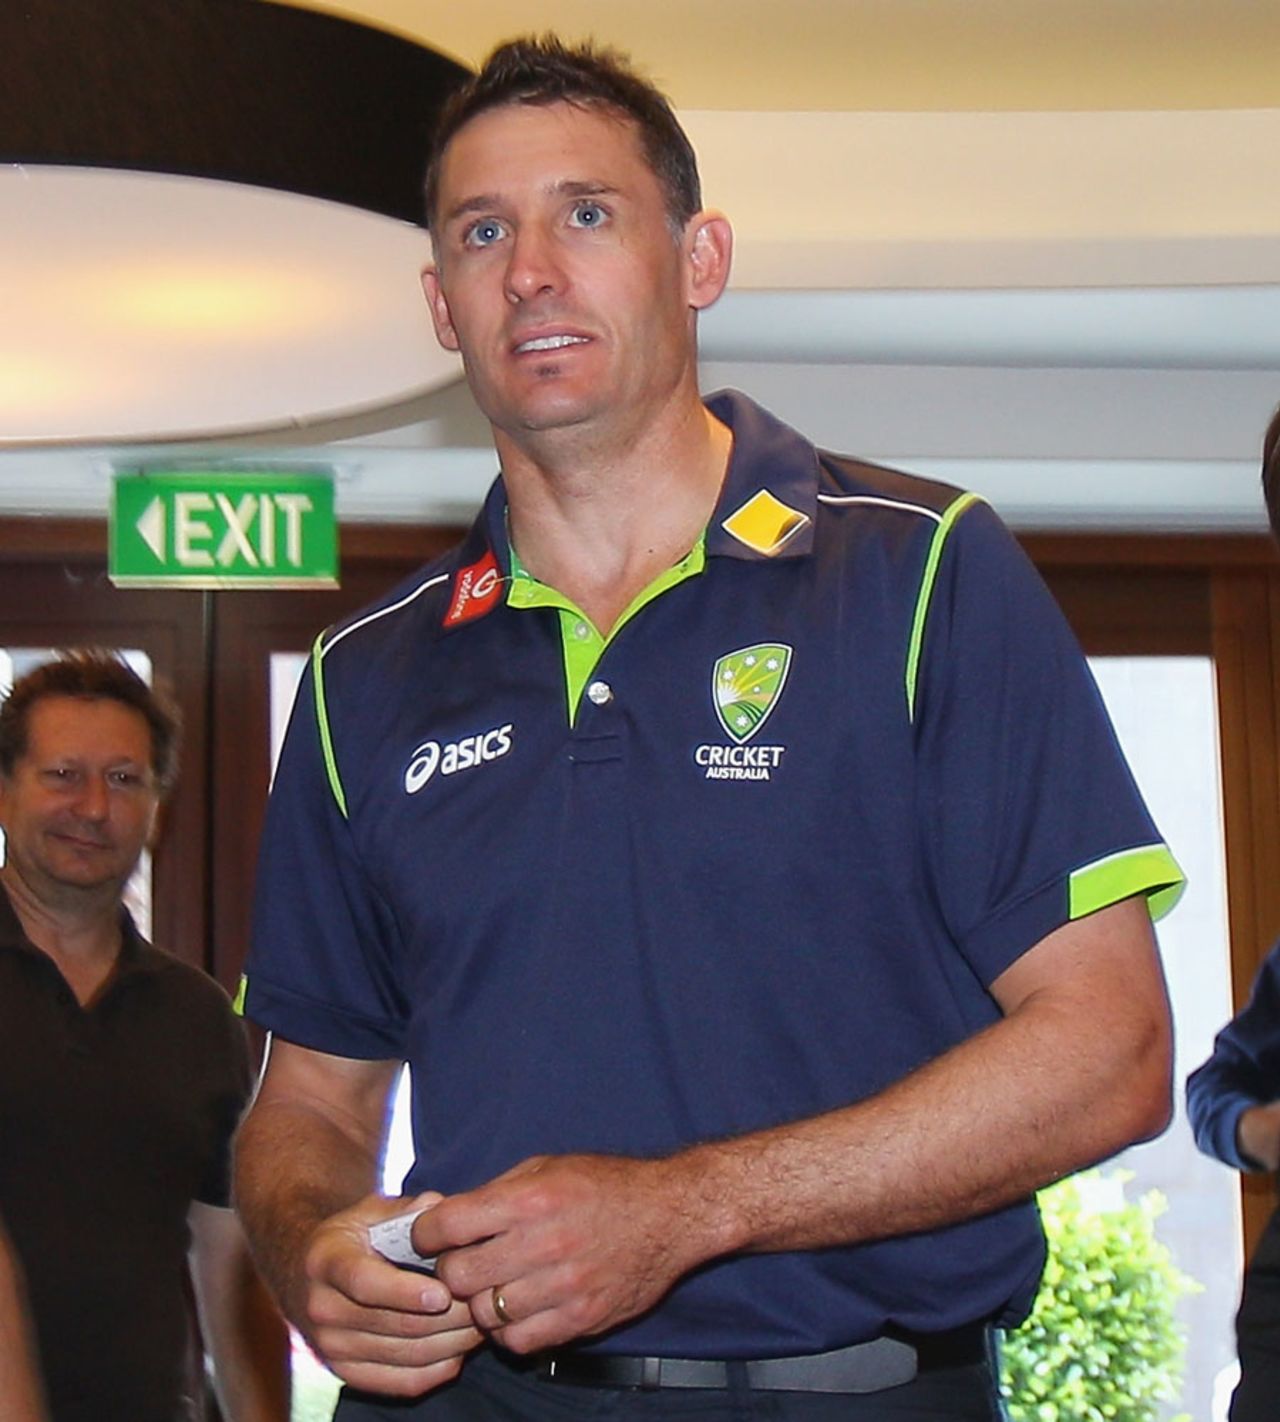 Michael Hussey will exit international cricket after the home summer, Melbourne, December 30, 2012